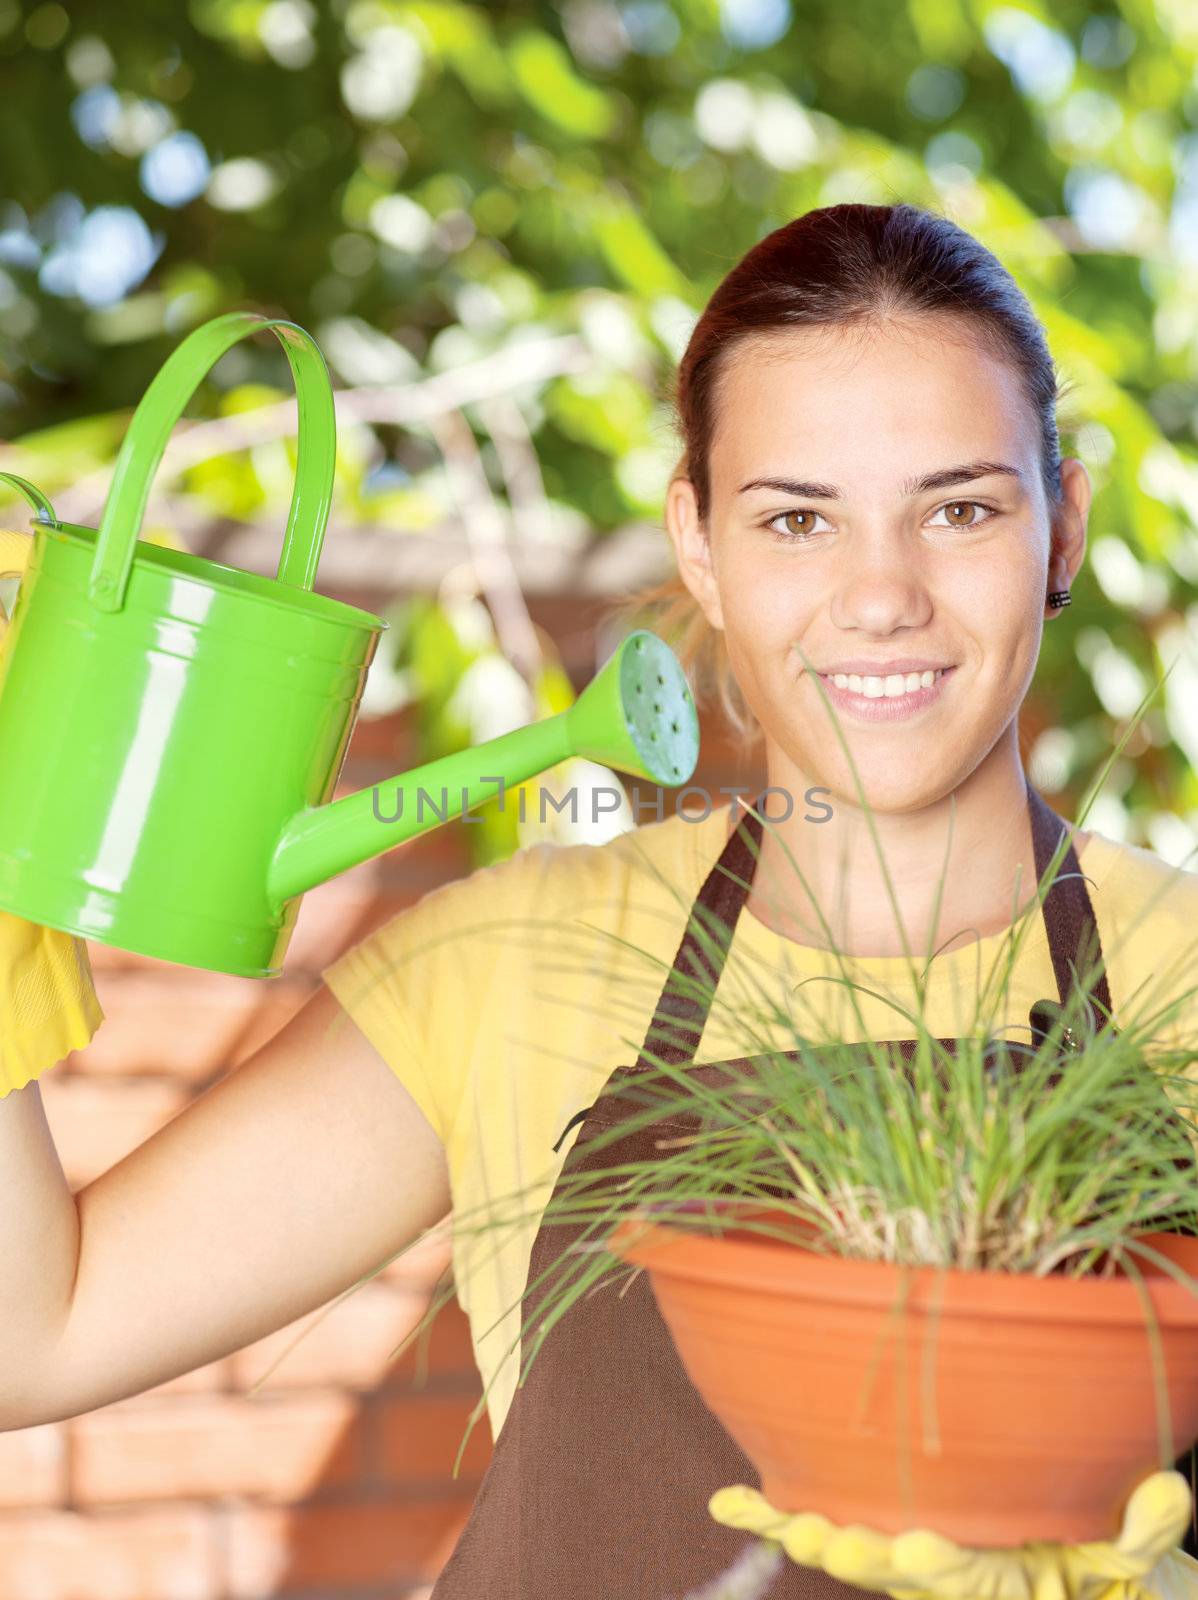 A young woman in a garden jobs on a sunny day